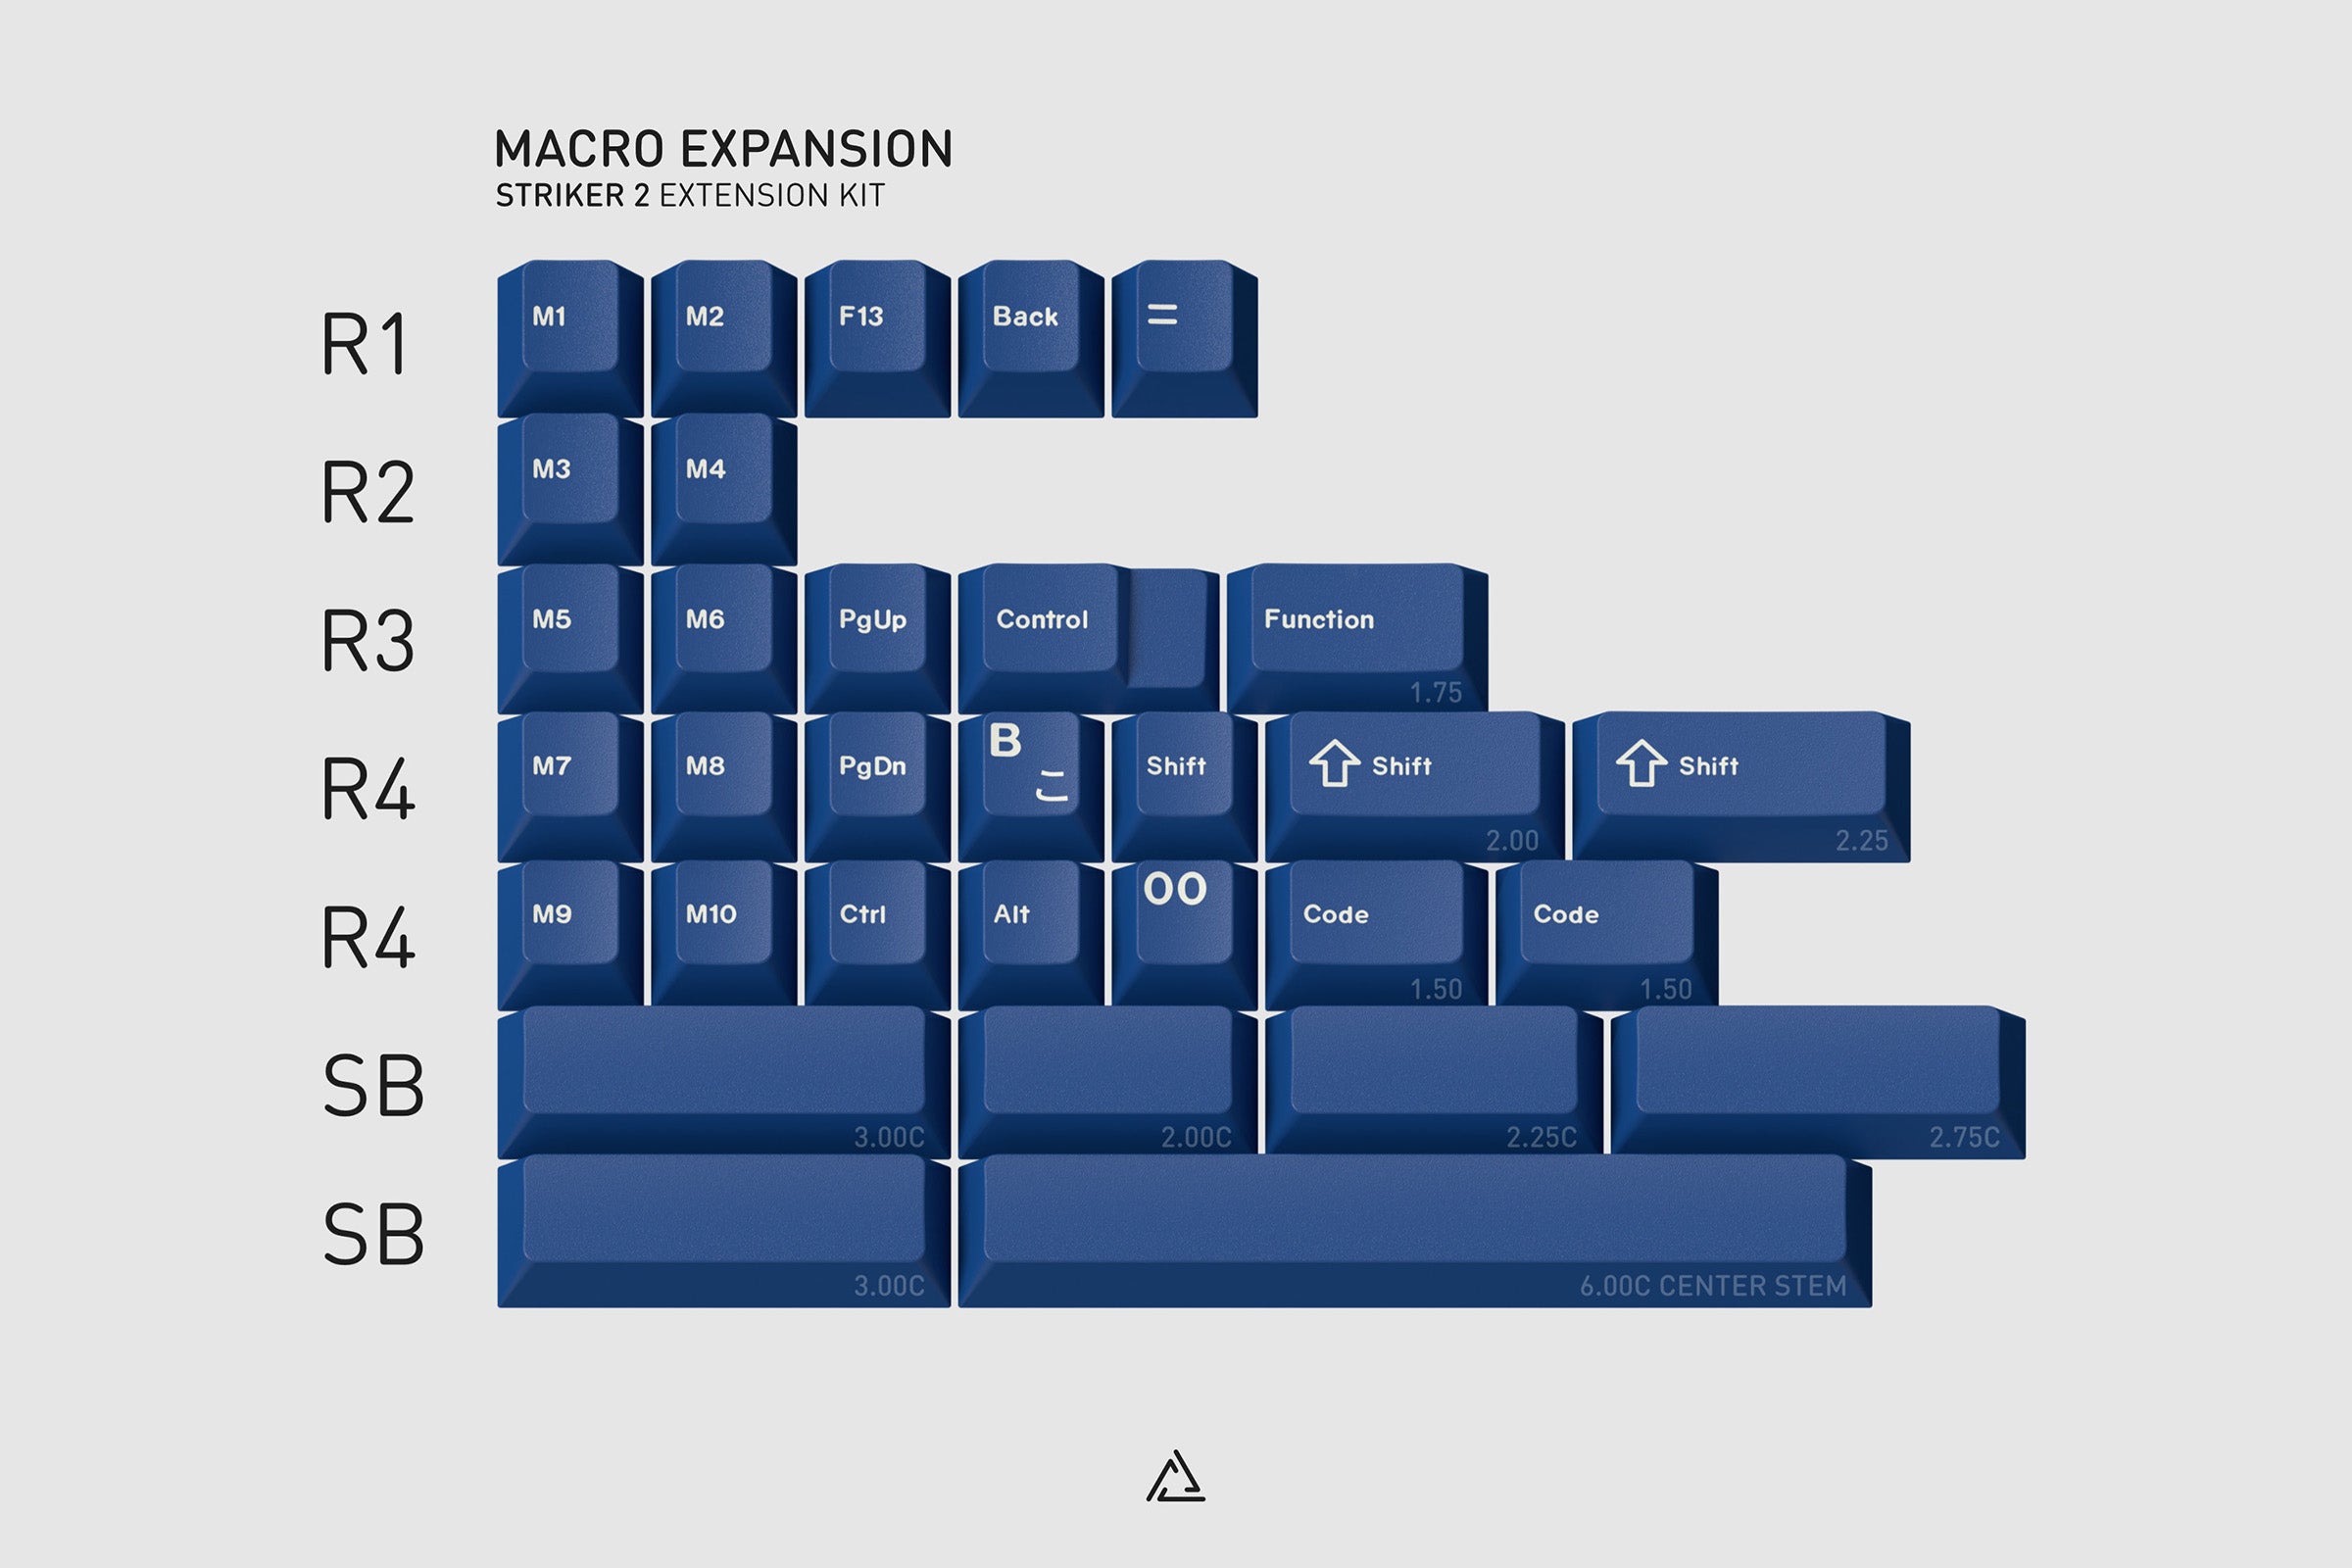 GMK Striker 2 Macro Expansion: The Macro Expansion add-on kit extends the Core’s layout coverage and provides support for 660-like keyboards, standalone numpads, ergonomic and split keyboards, 88-key tenkeyless boards, 60% keyboards with arrows, and extended boards.